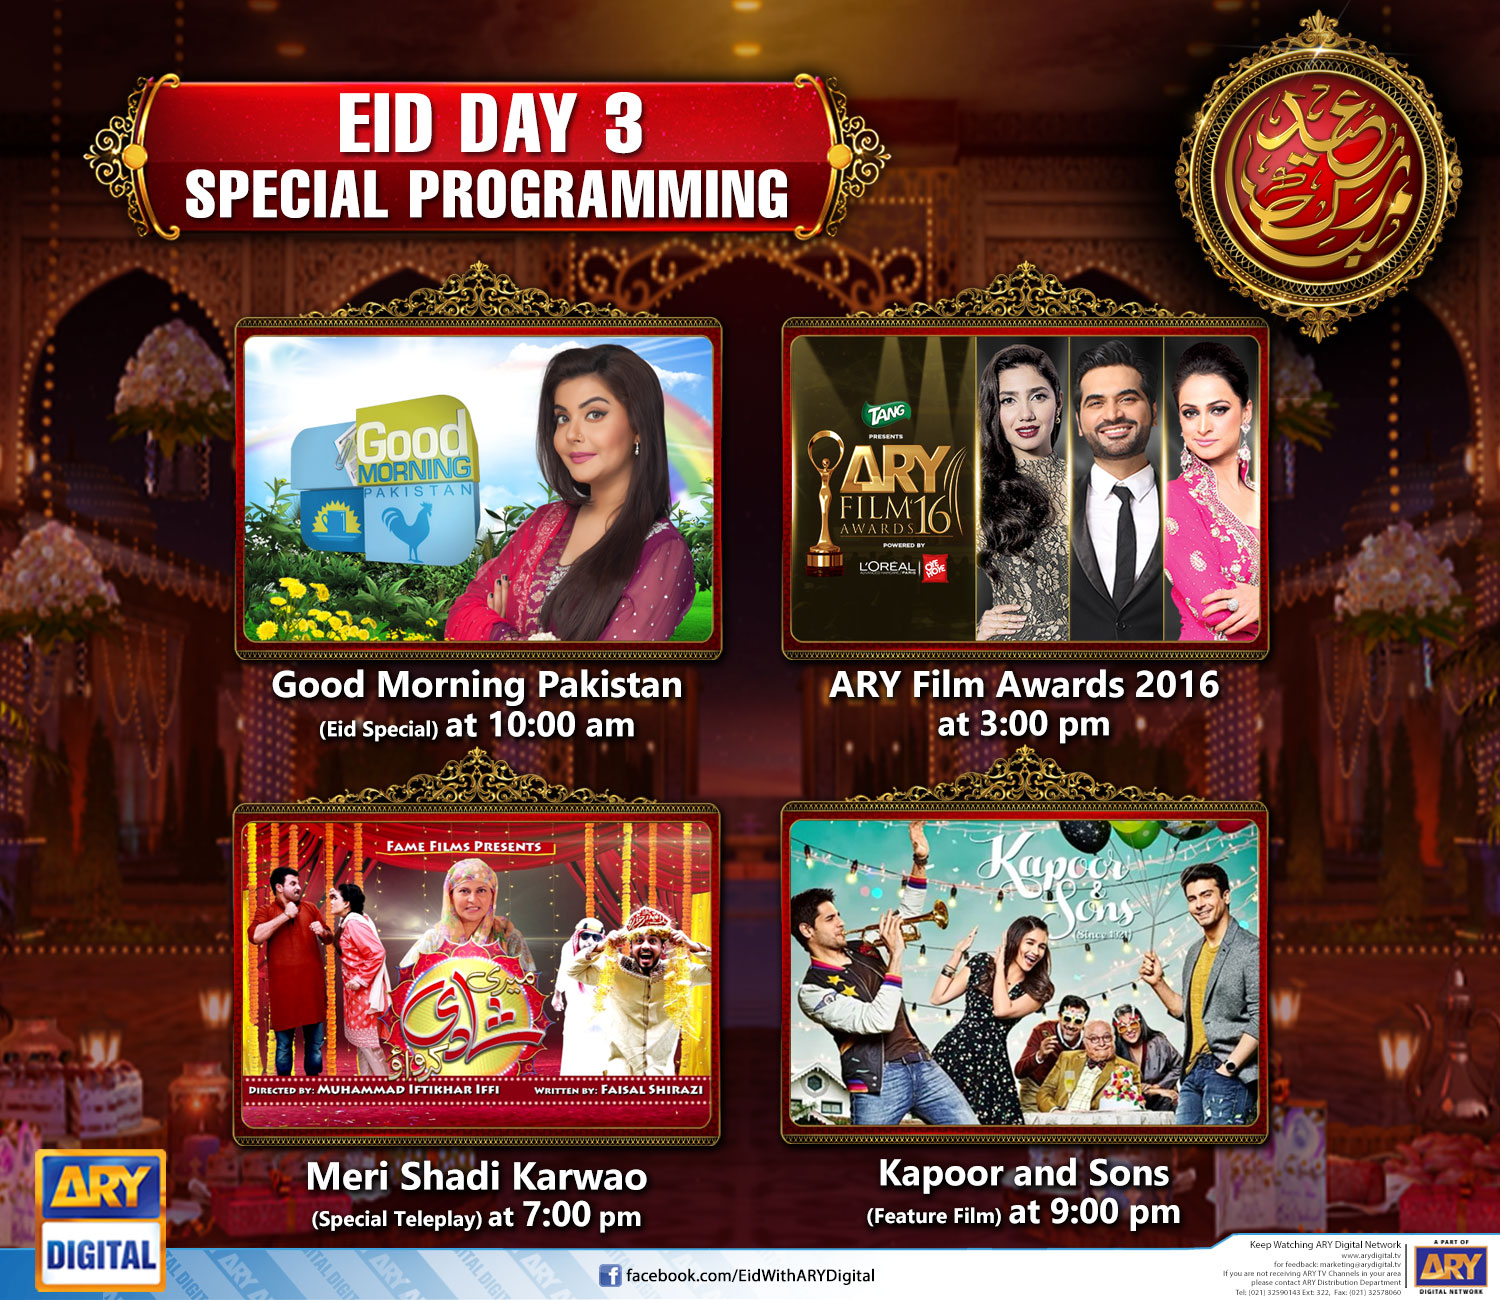 [Press Release] ARY Digital and ARY Zindagi brings exciting programs for Eid 2016 (3)